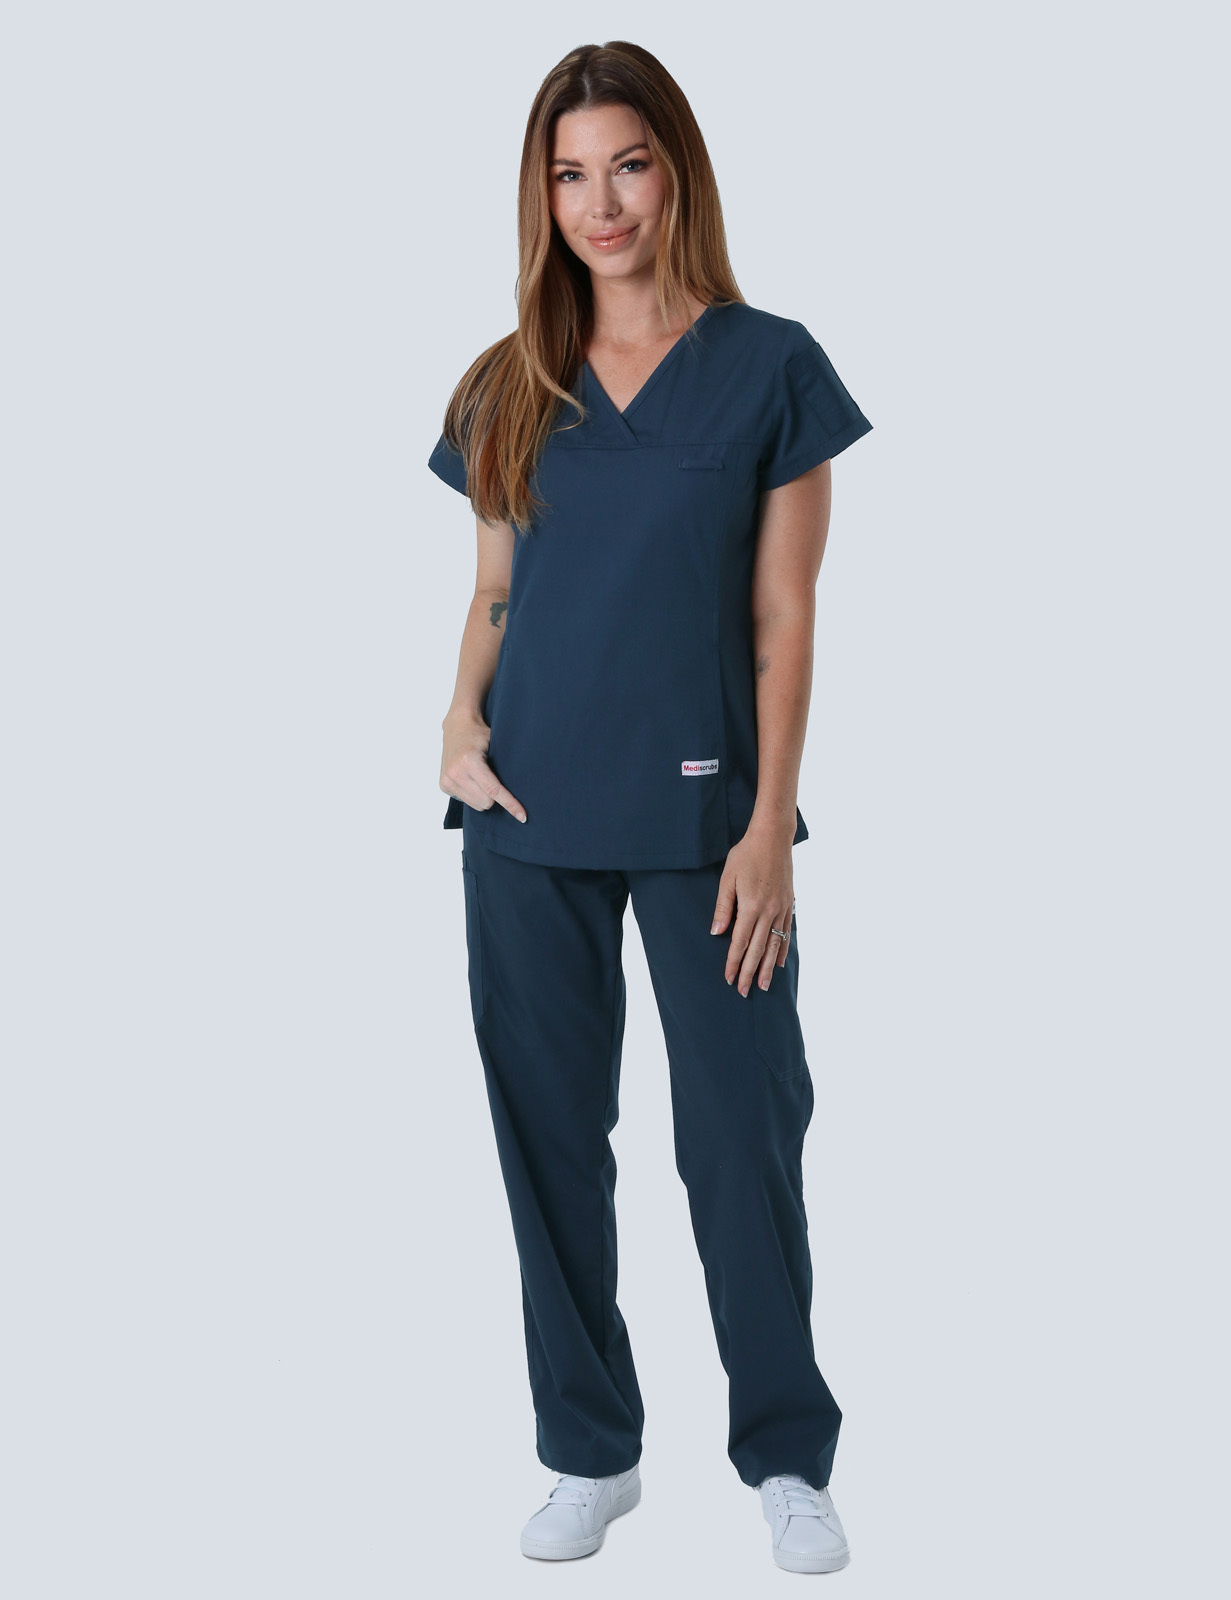 Women's Fit Solid Scrub Top - Navy - Large